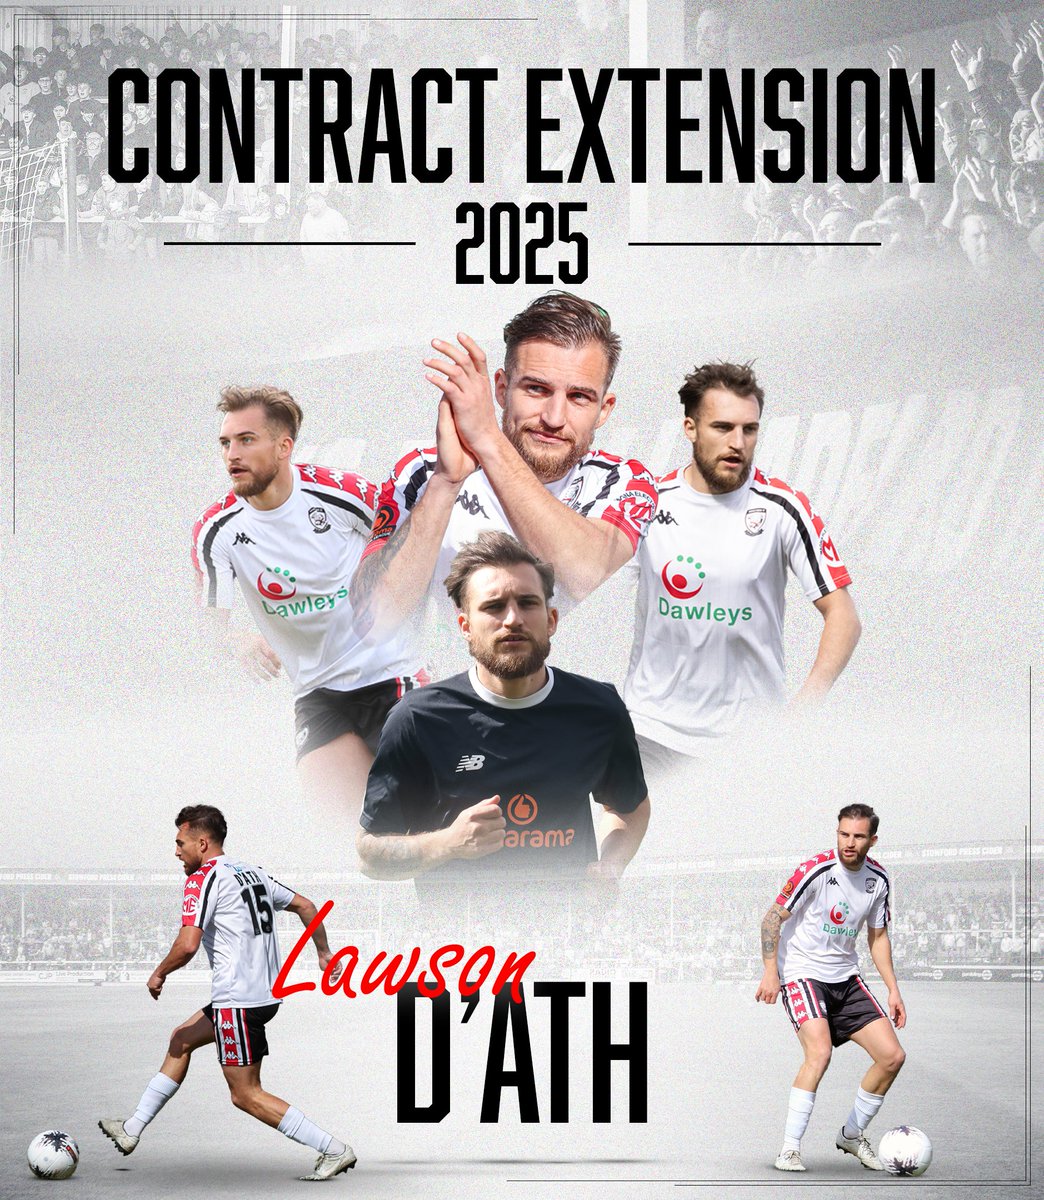 We're delighted to announce the contract extension of Lawson D'Ath for the 24-25 season. 👊 Great to have you on board, Lawson! 🤝 herefordfc.co.uk/news-lawson-da… #COYW | #OurCity